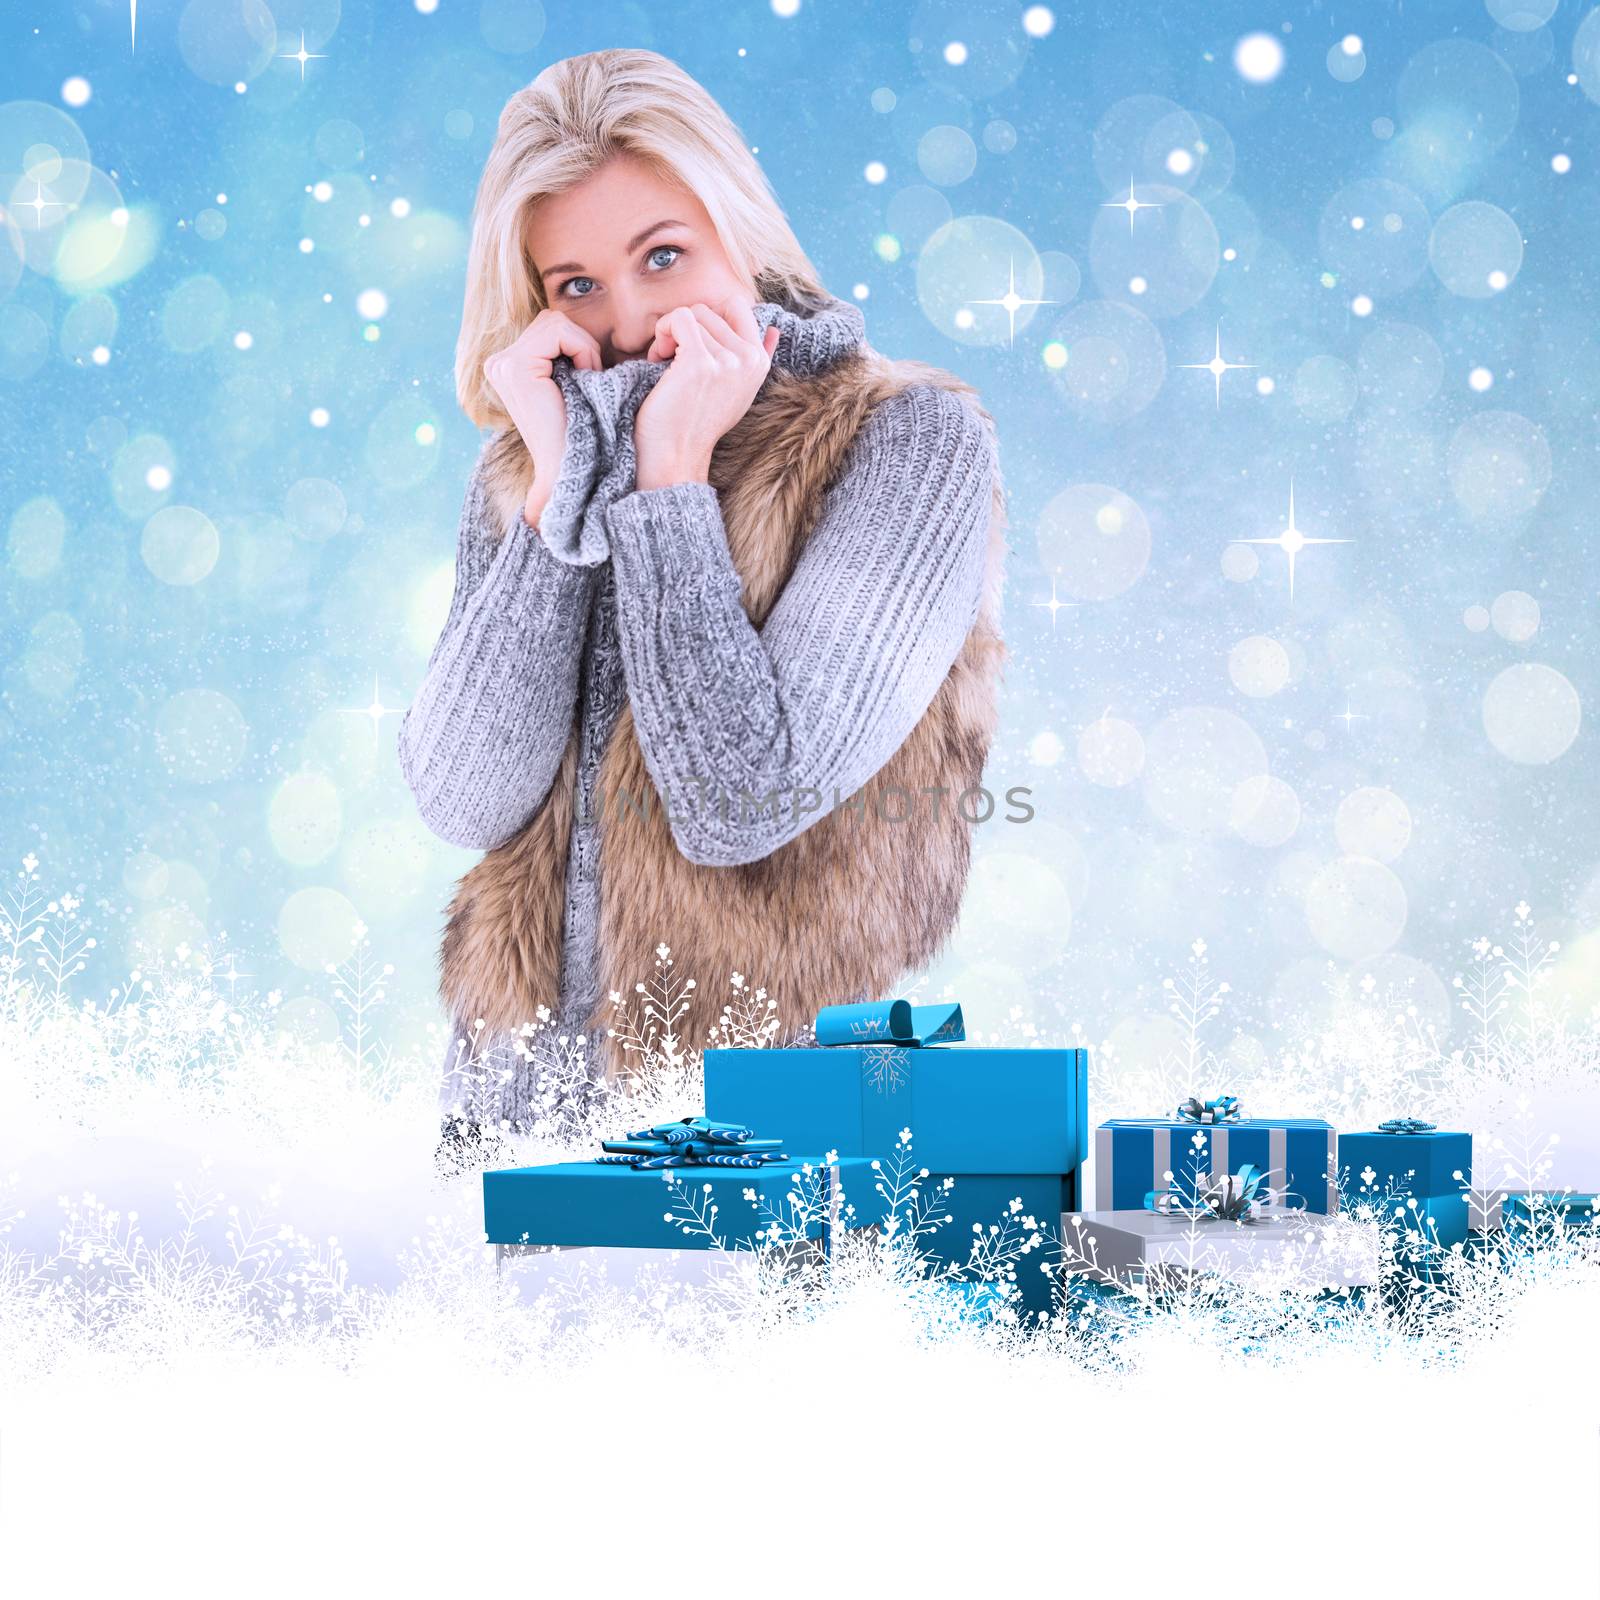 Blonde in winter clothes smiling at camera against blue abstract light spot design